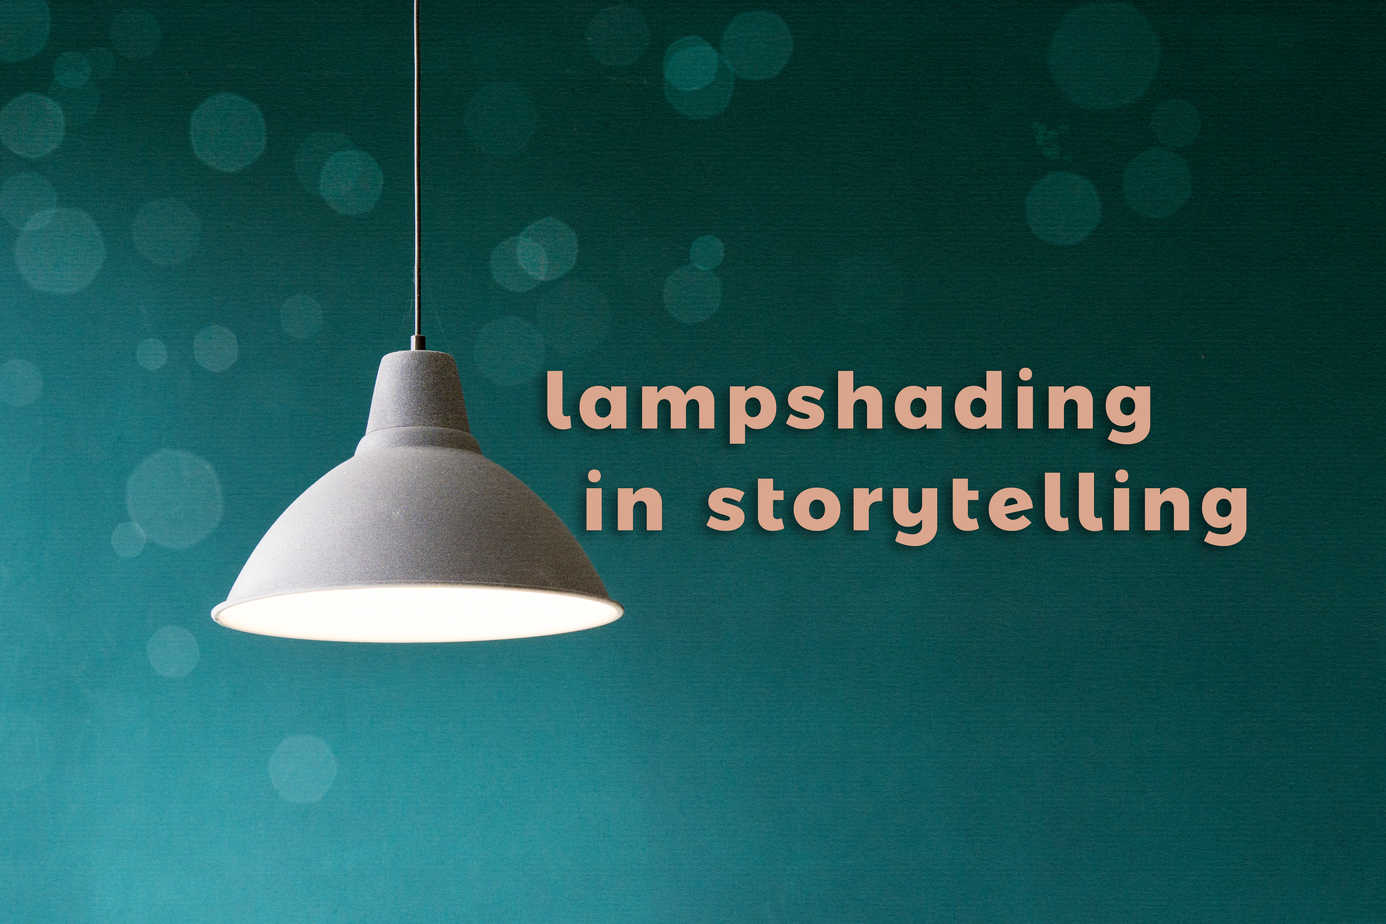 Lampshading in storytelling. What is that?